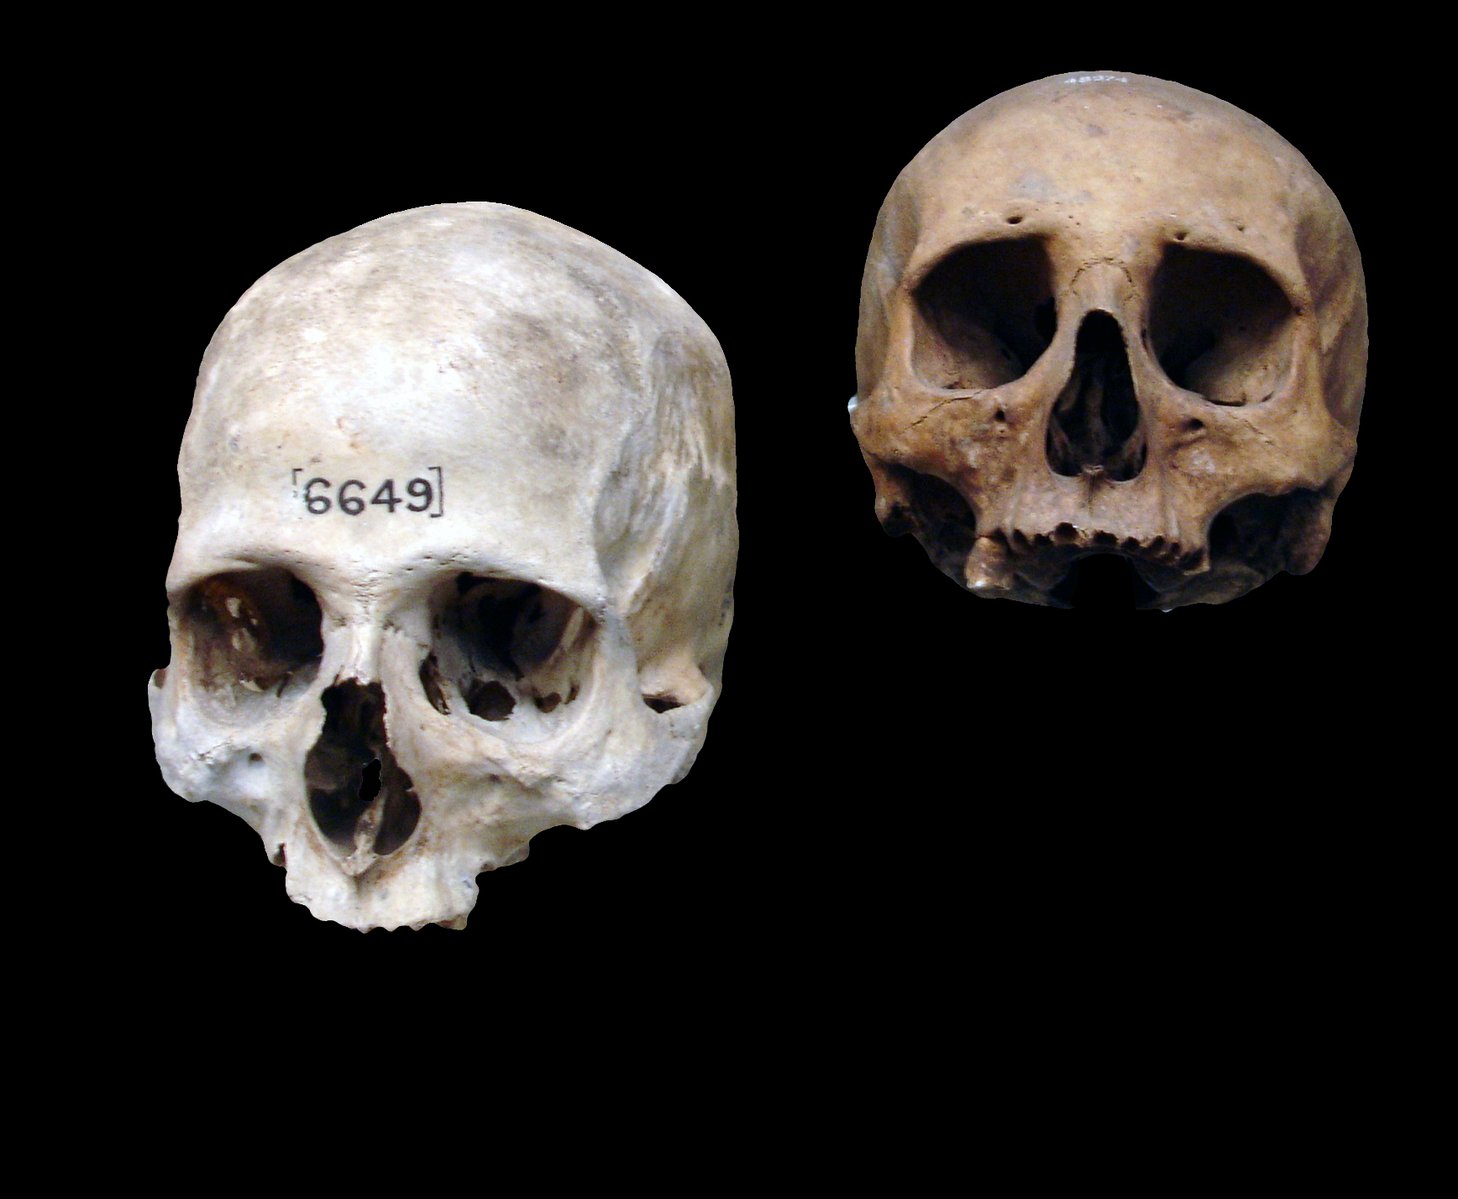 two images of the bones of a baby skull and a skeleton with words inscribed in their skulls